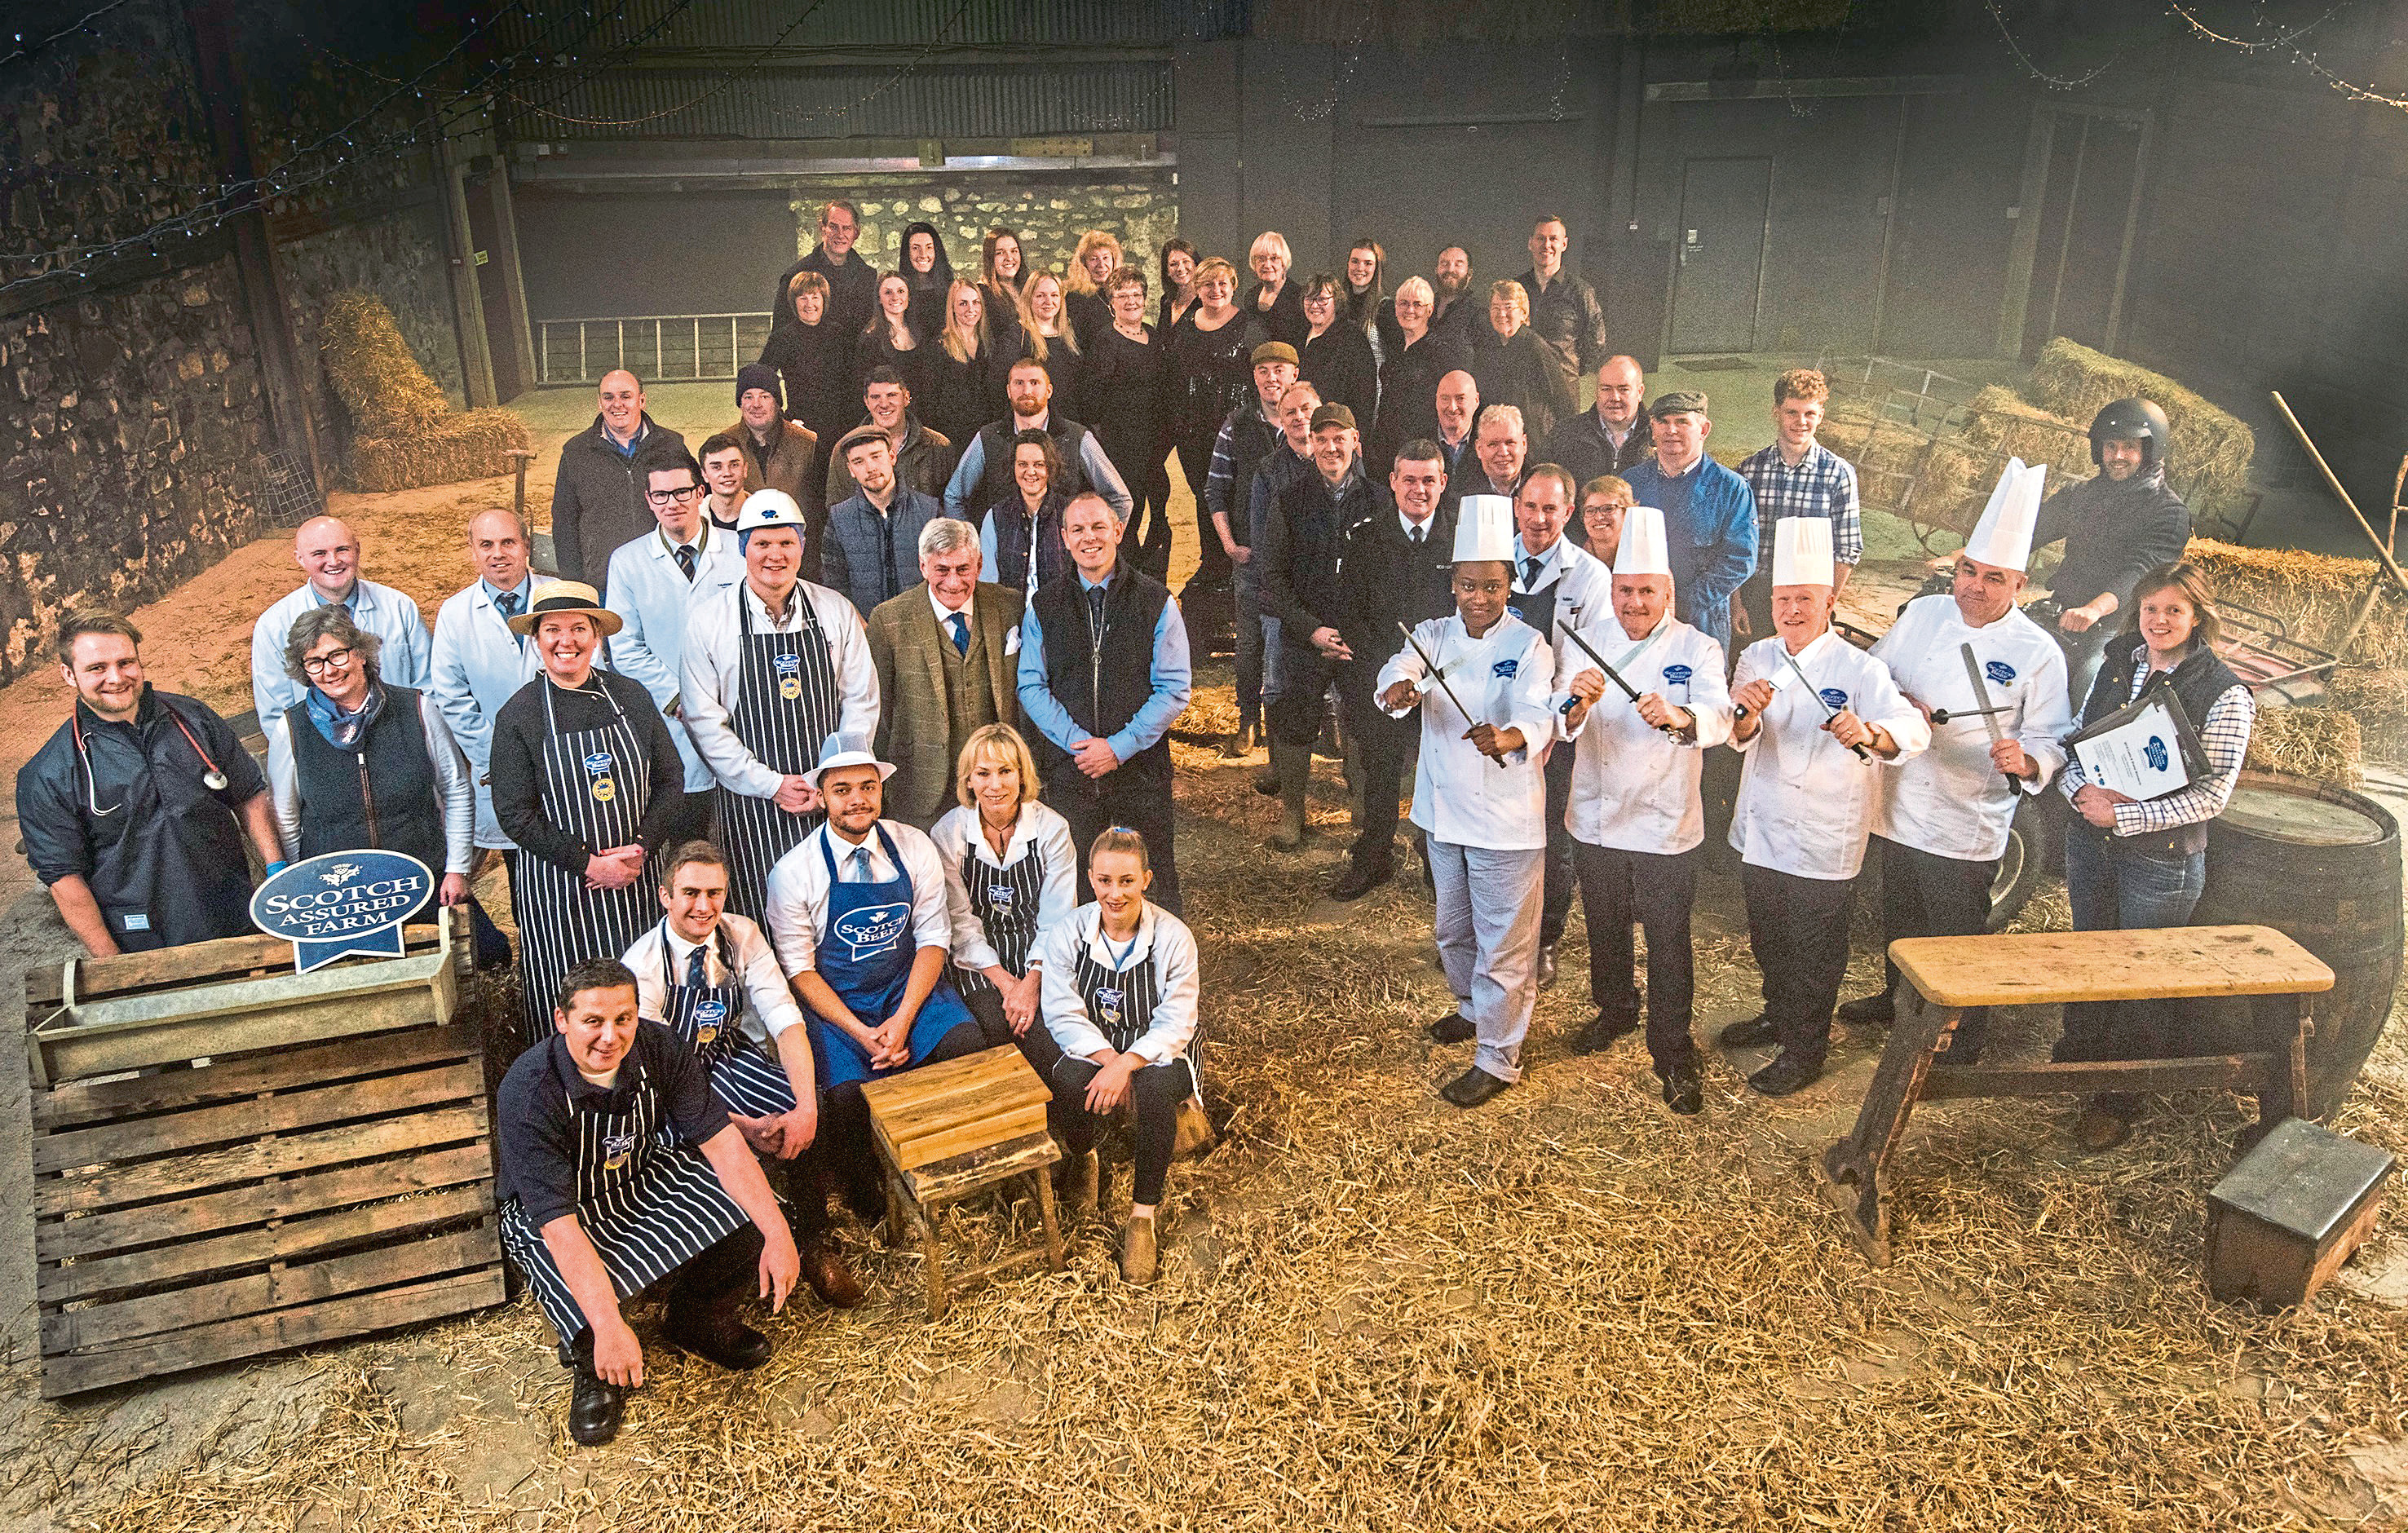 A wide range of people who work in different parts of the Scottish beef industry - farmers, butchers, chefs, quality assurance assessors, auctioneers as well as representatives from the veterinary, haulage and processing sectors – came together to film the new Scotch Beef PGI “Know Your Beef” TV advert.